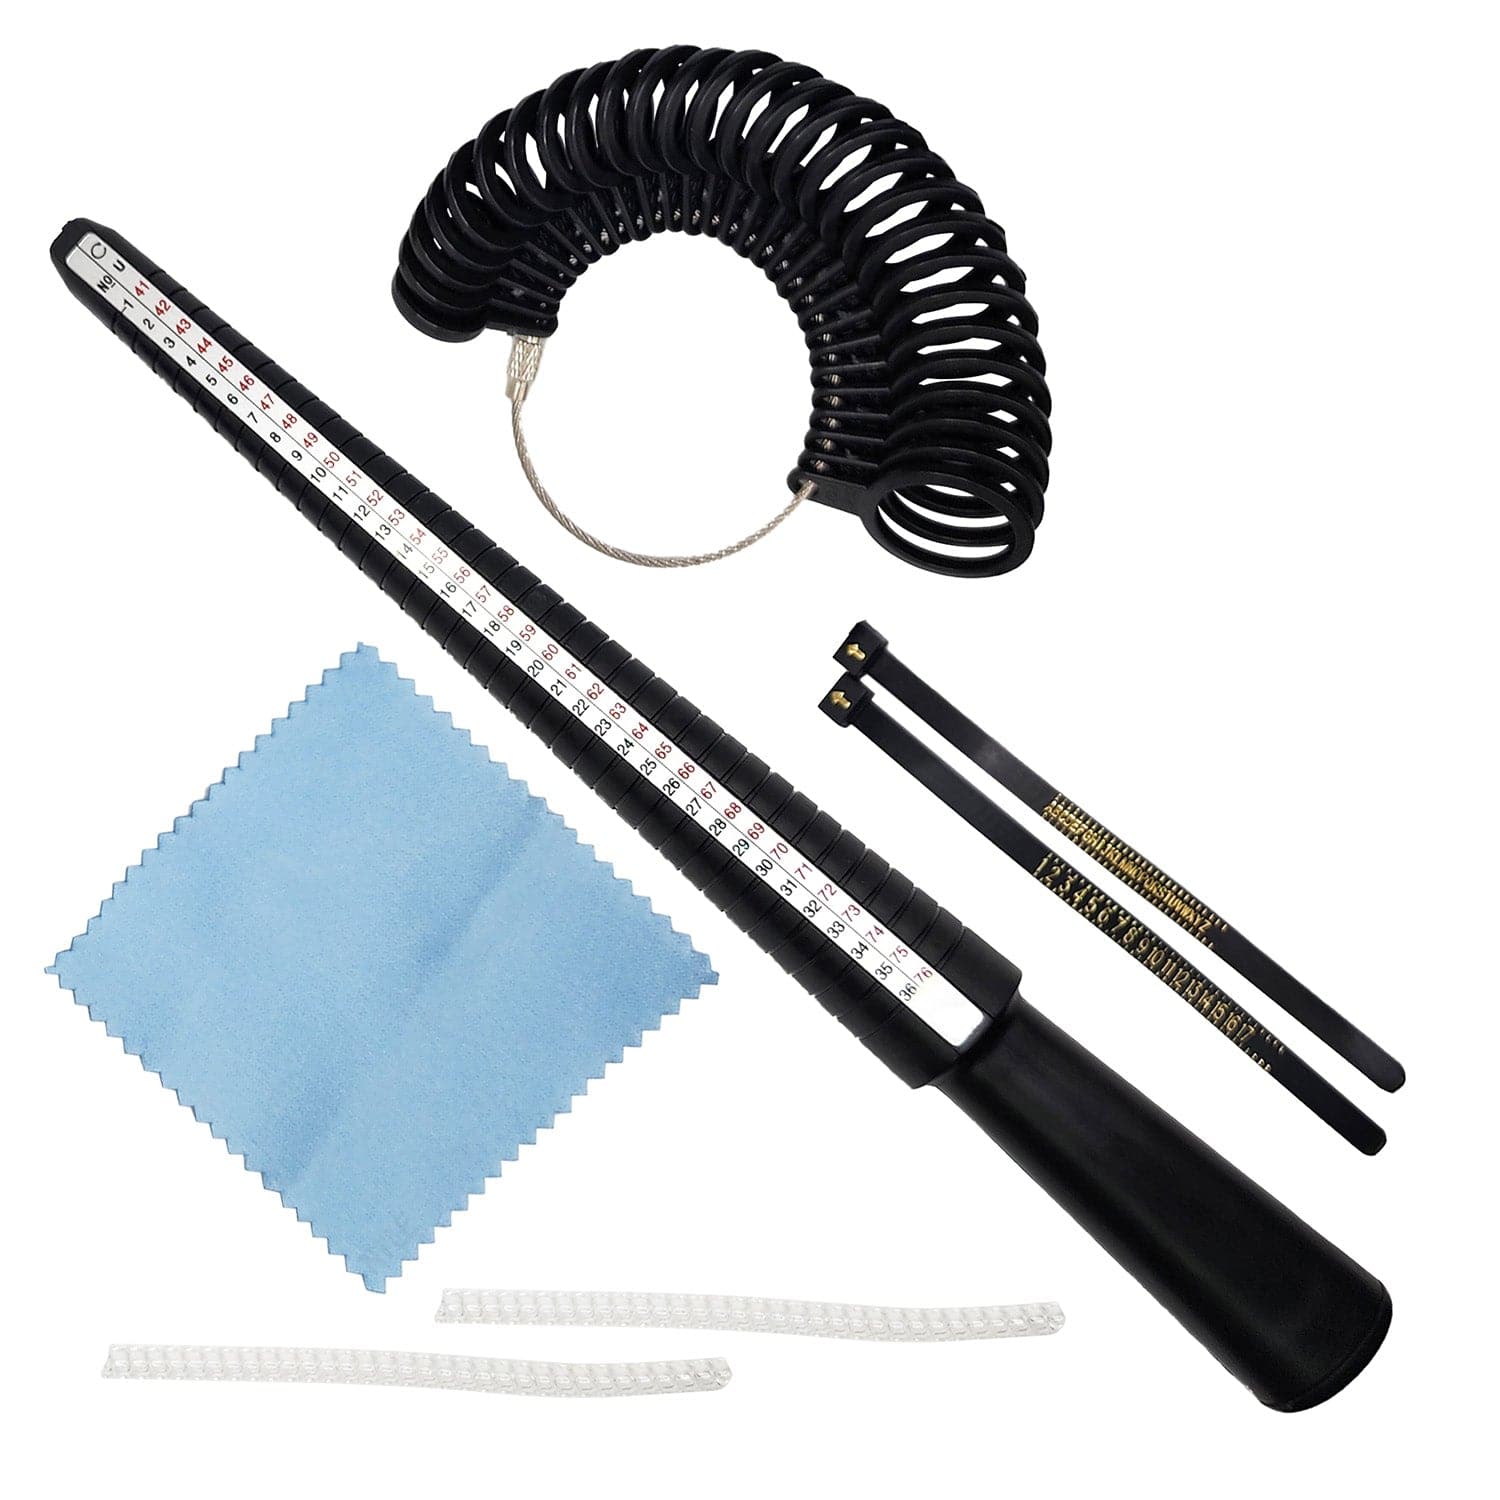 LD08580 Set of 7 Ring Sizing Tools Including 1 Ring Mandrel in Black, 1 US Ring  Sizers, 1 EU Ring Sizers, and 2 Transparent Adjusters for Loose Rings,  Accompanied by 1 Microfiber Polishing Cloth.